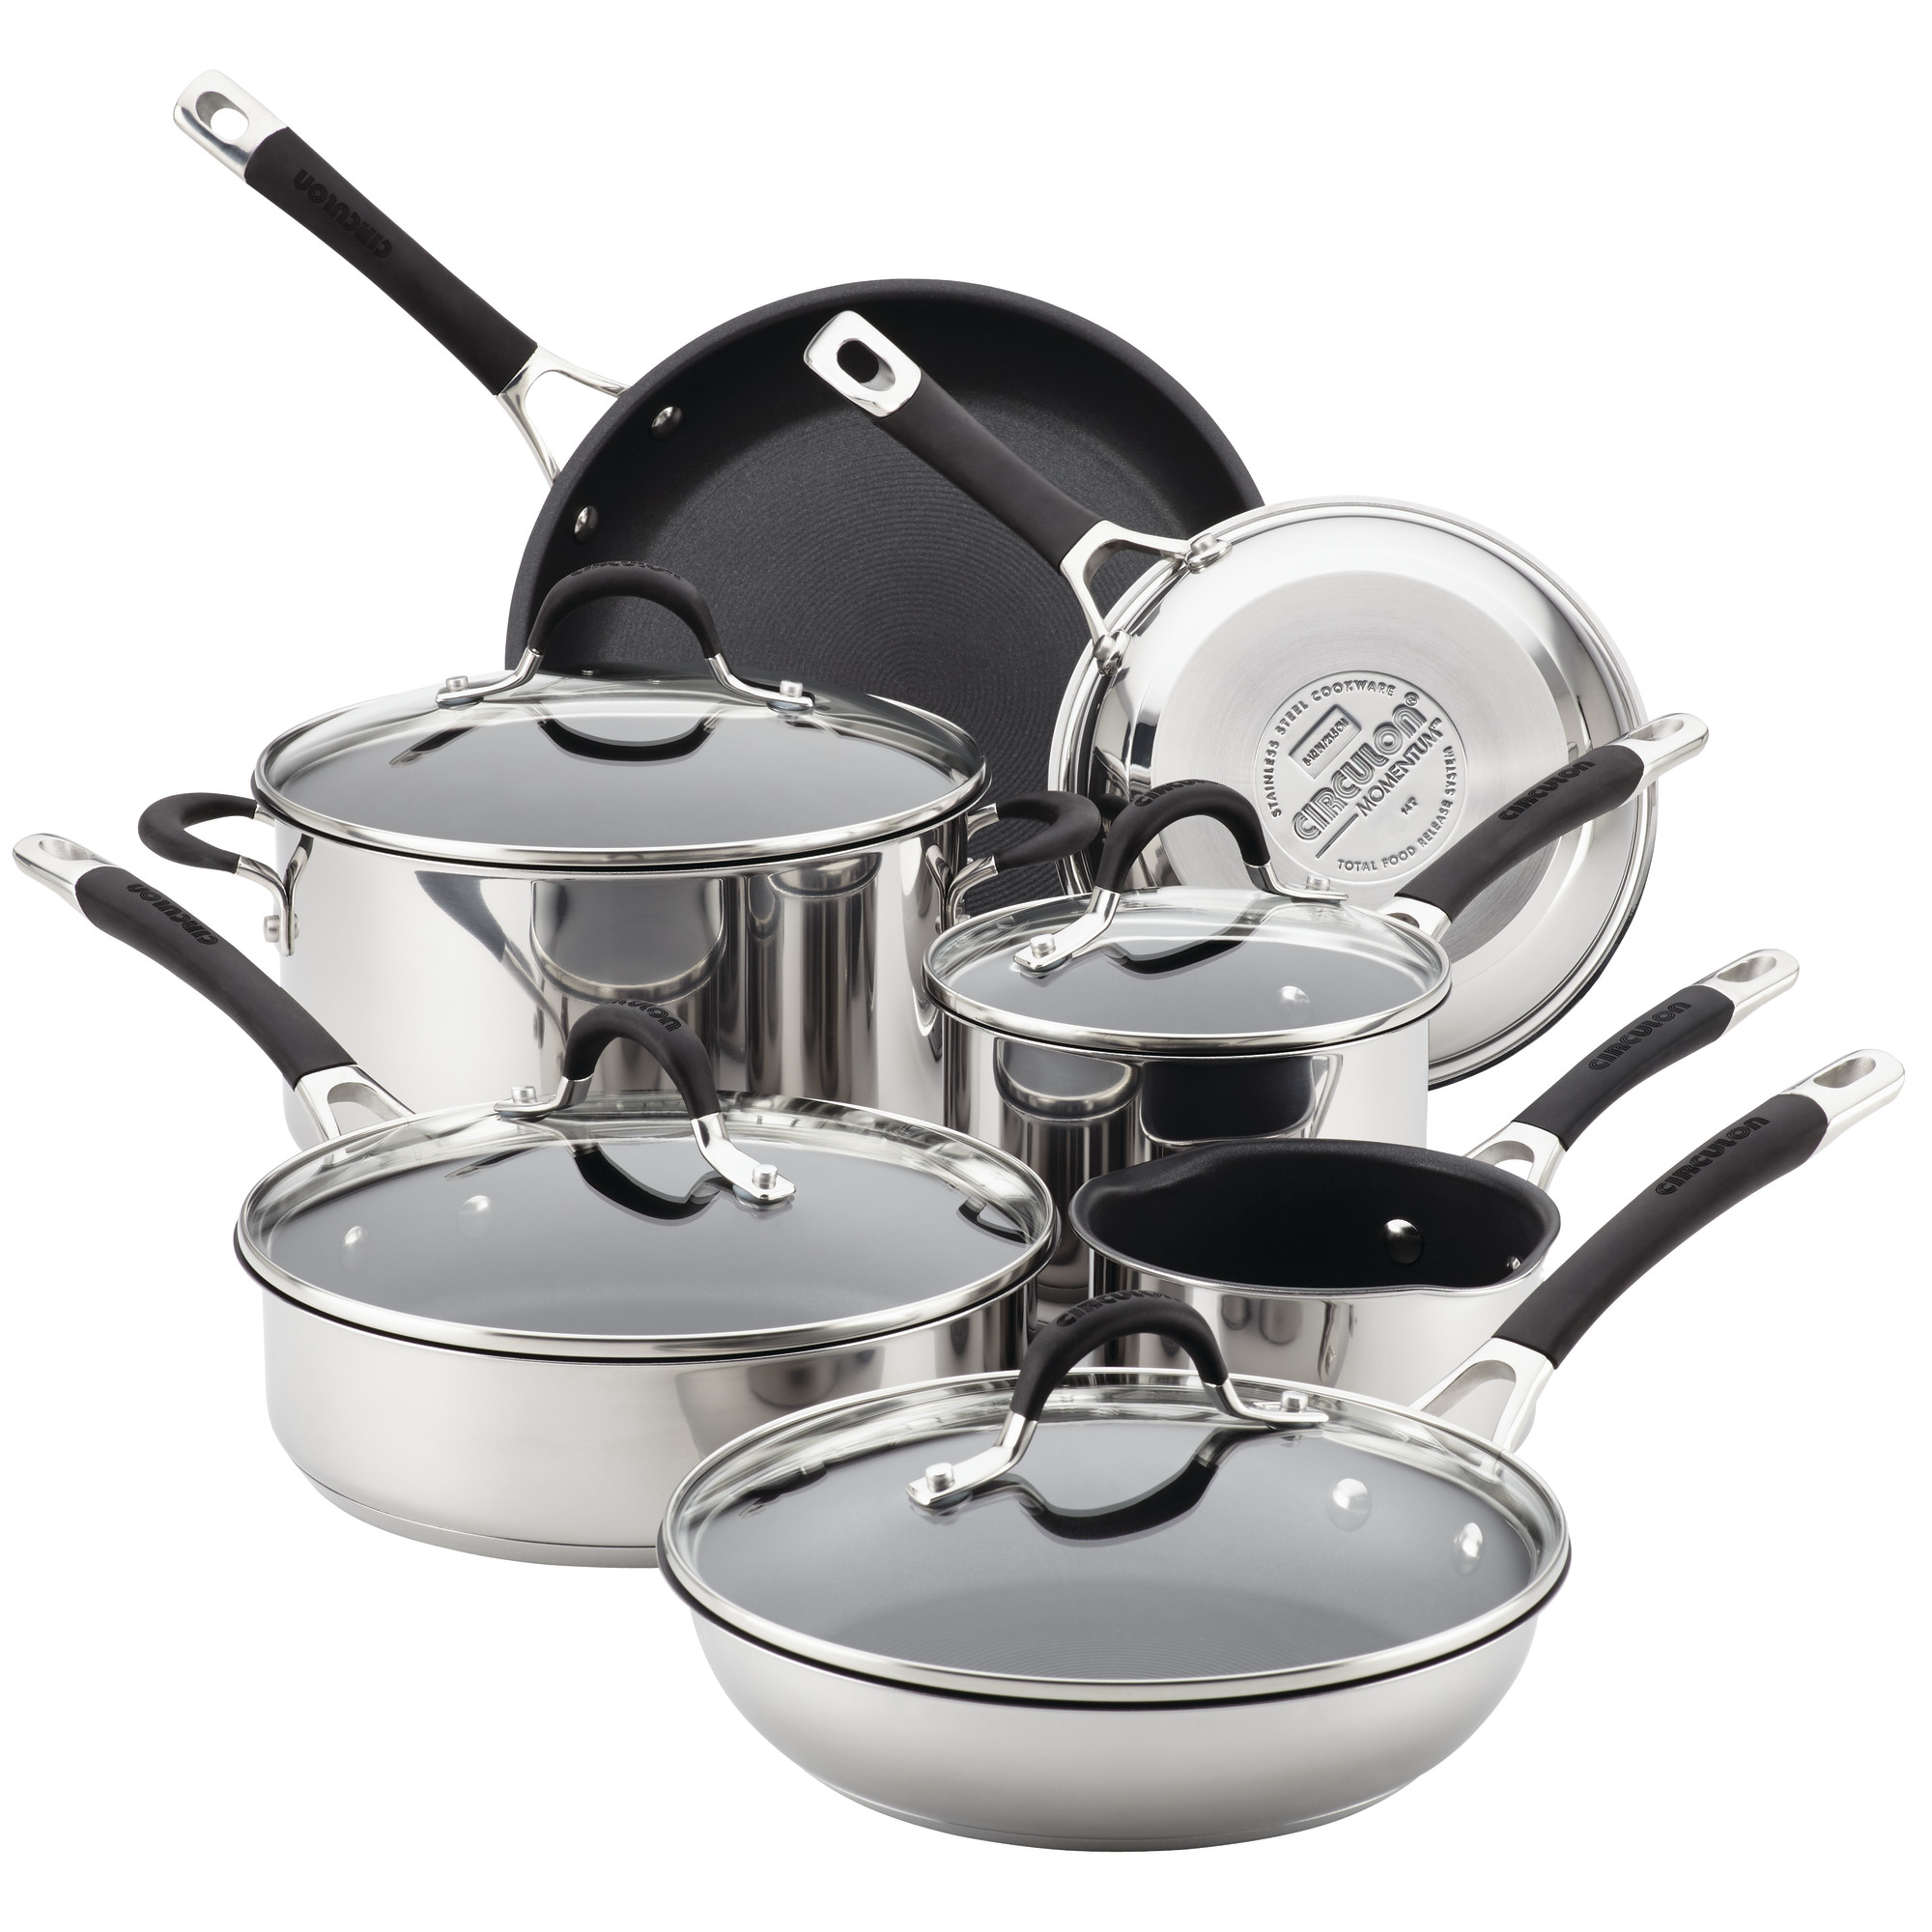 Circulon 11 Piece Momentum Stainless Steel Nonstick Pots and Pans - image 1 of 7